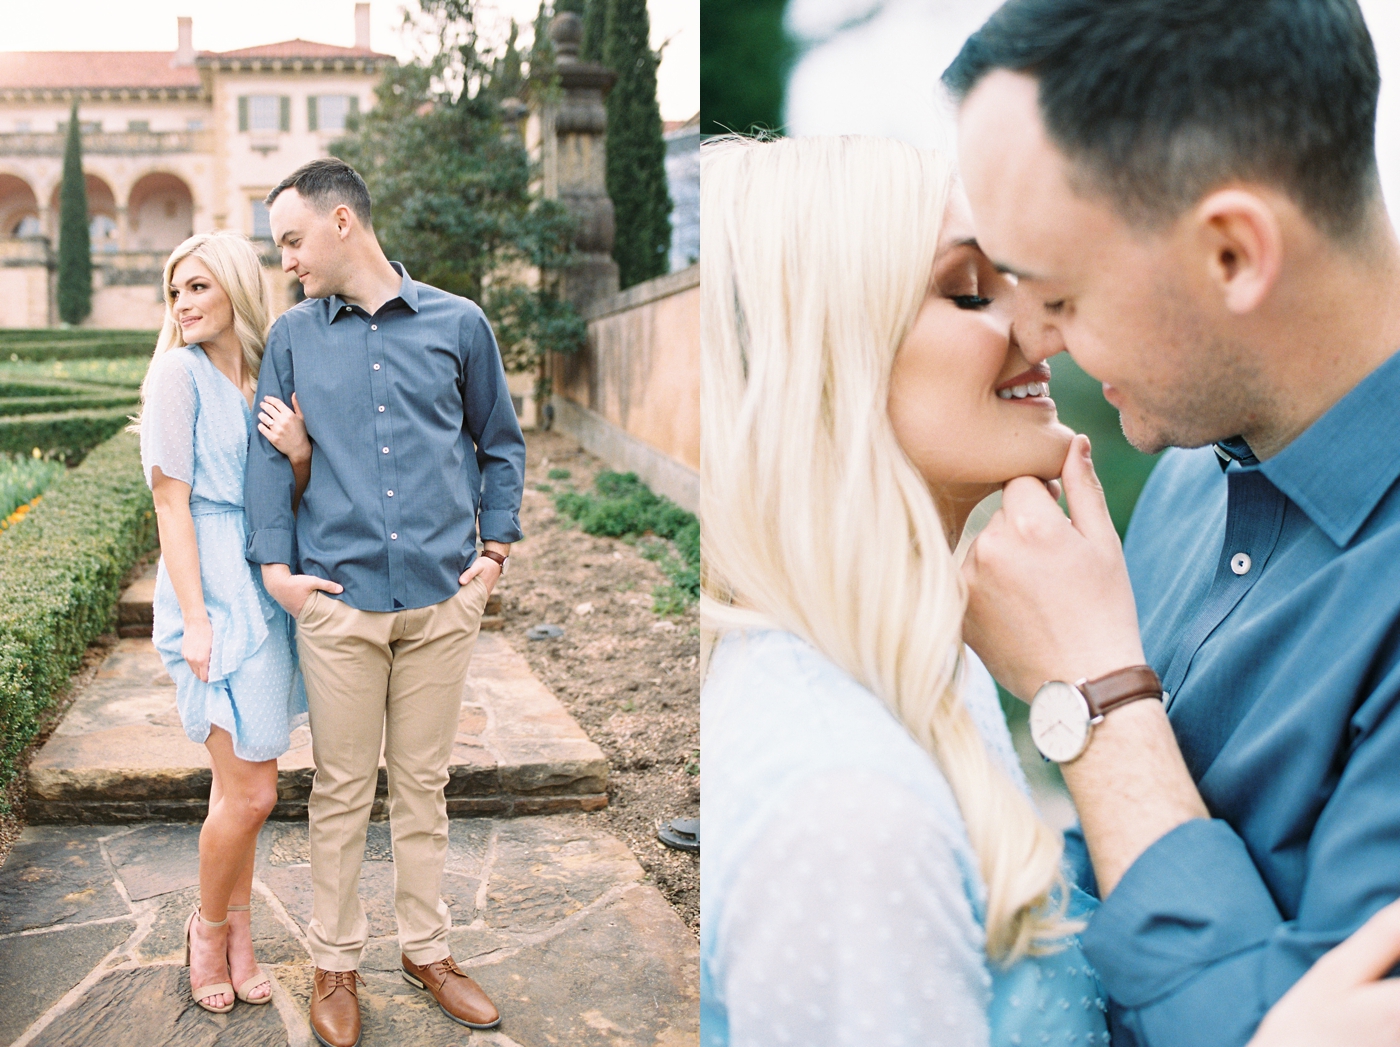 Outdoor engagement session in Tulsa, Oklahoma